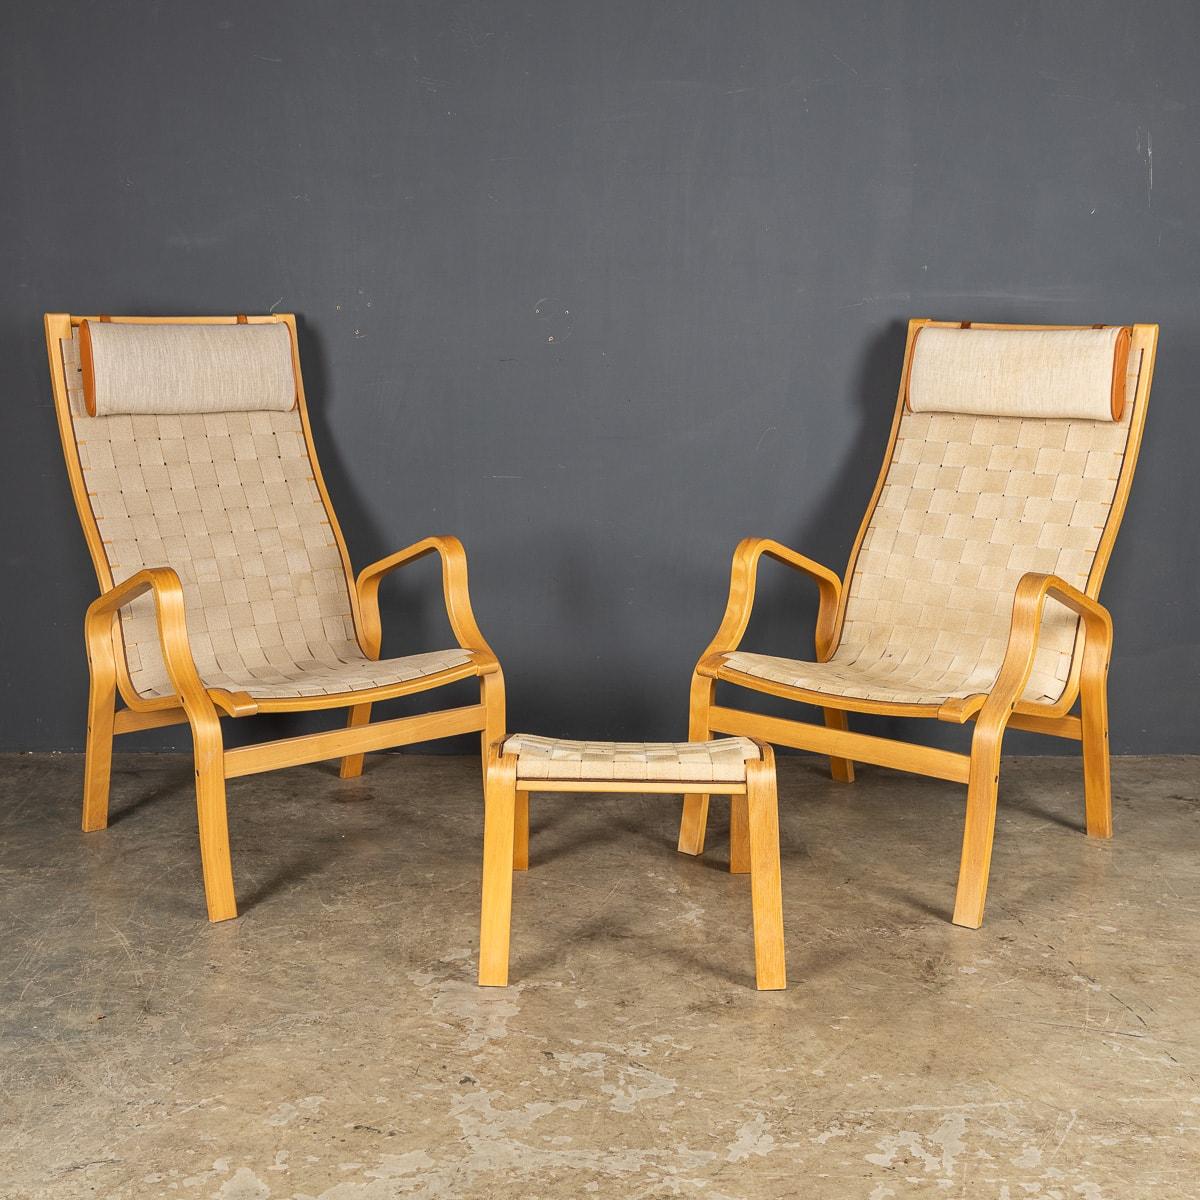 A Pair of lounge chairs designed in 1938 by Bruno Mathssen but not finalised until ten years later and finally named the Eva Arm Chair in 1978 when it had evolved into a more upright and streamlined object of beauty.

Created in solid Birch and